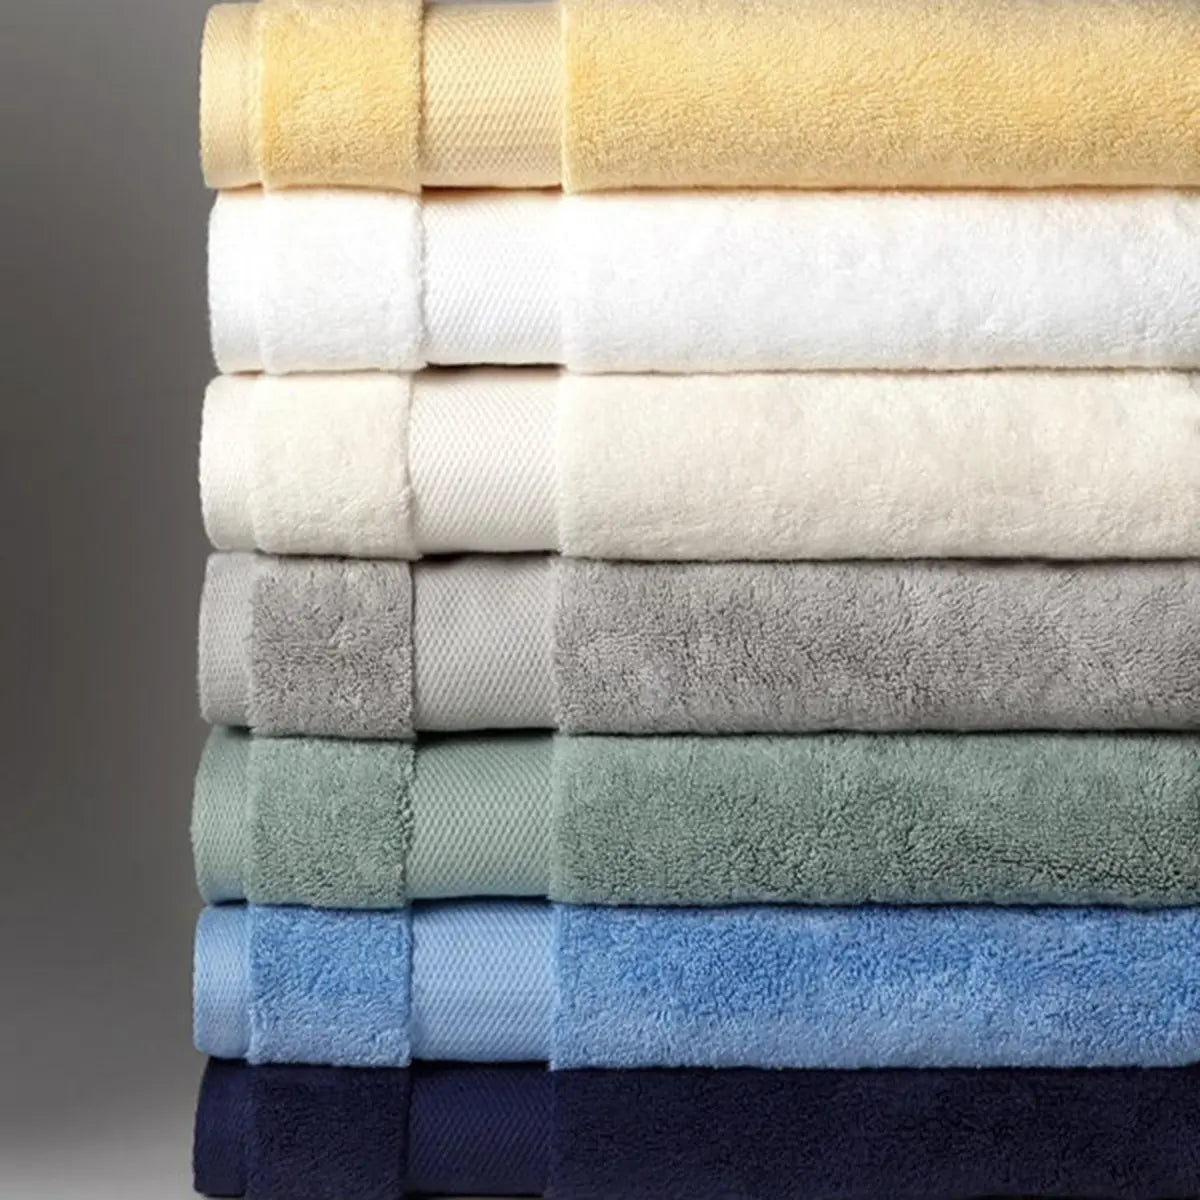 Sferra Sferra Bello Towels stacked together in various colors